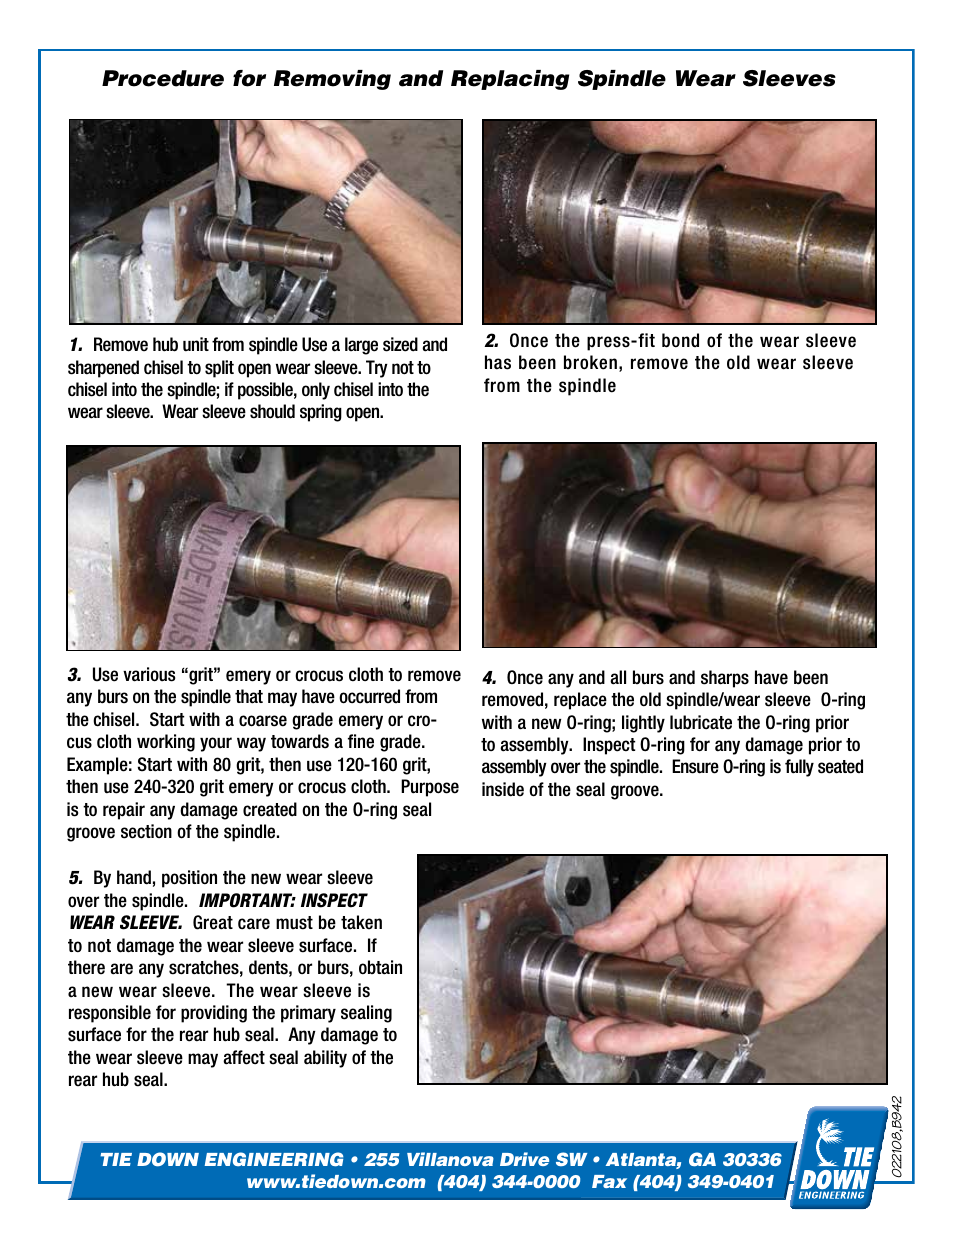 Spindles Procedure for Removing and Replacing Spindle Wear Sleeves